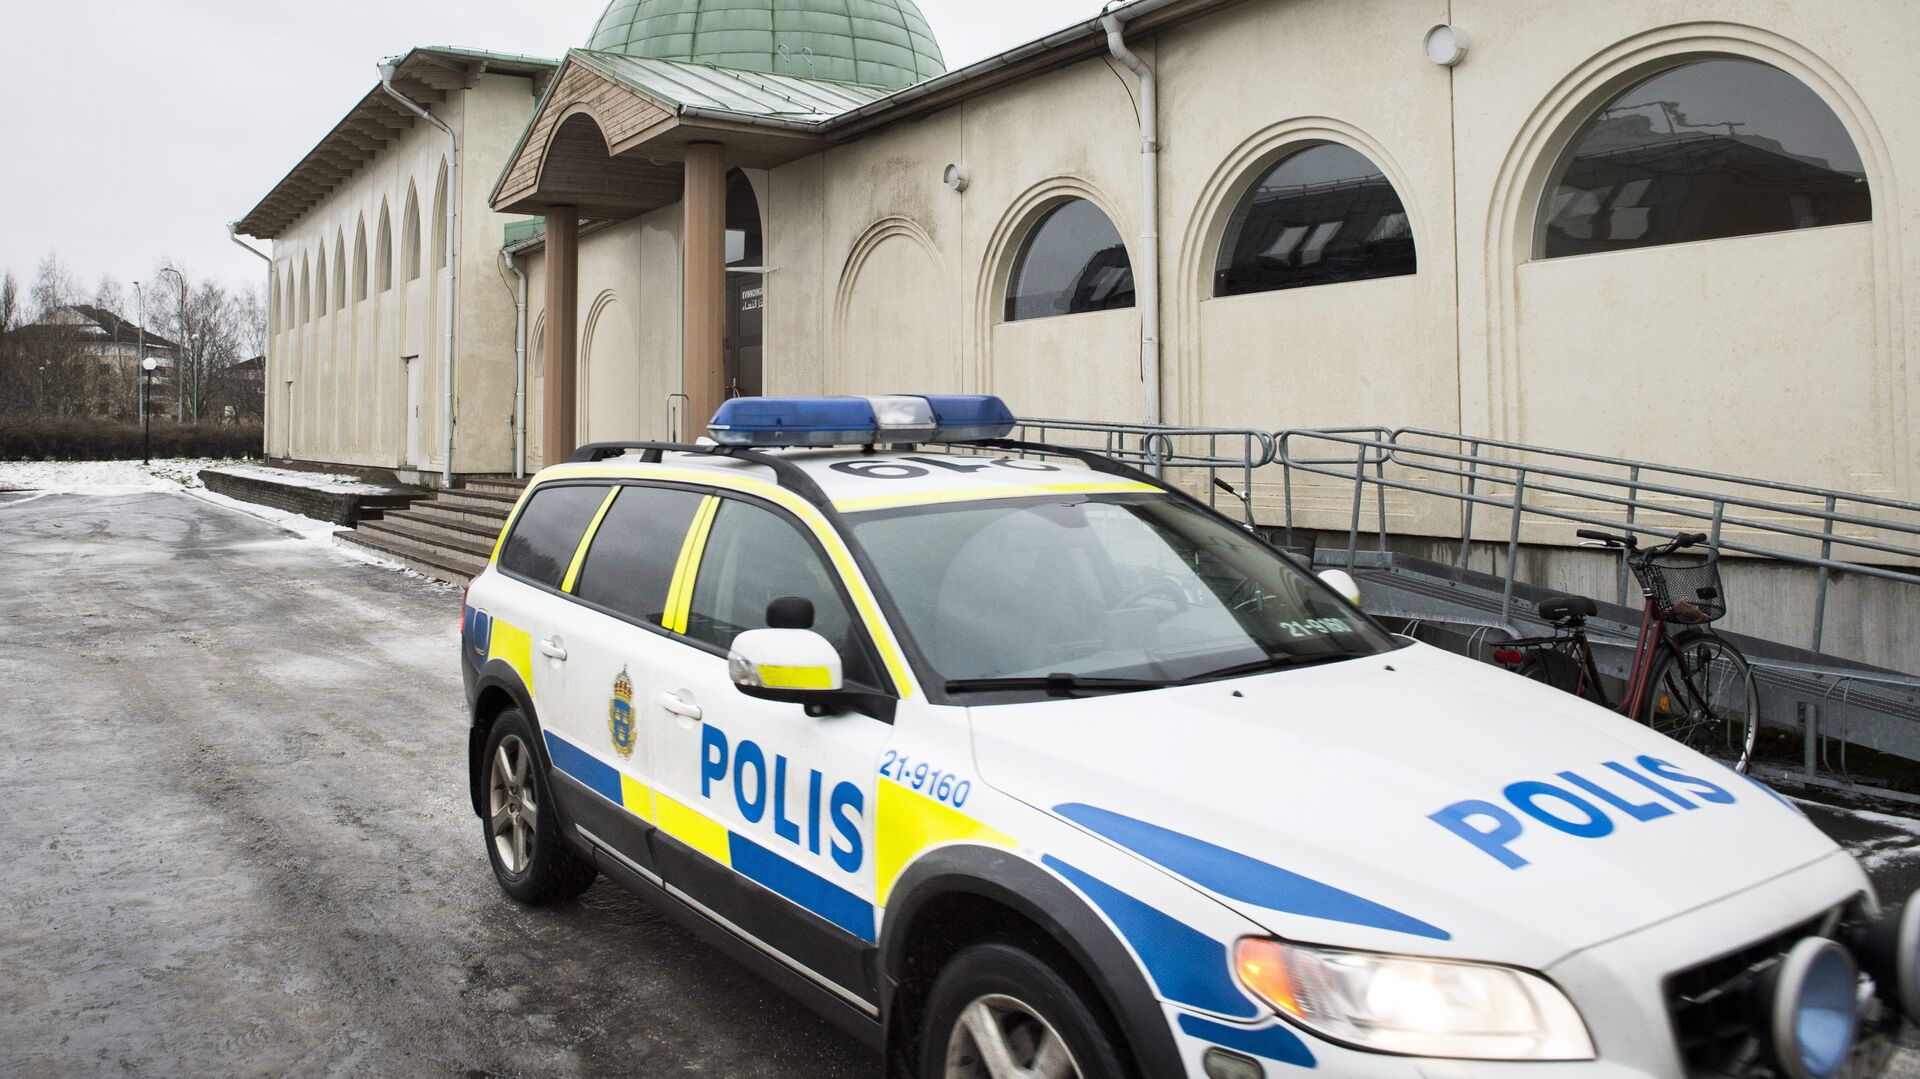 (File) A police car is parked in front of a mosque in Uppsala, Sweden, 1 January 2015 - Sputnik International, 1920, 19.07.2021